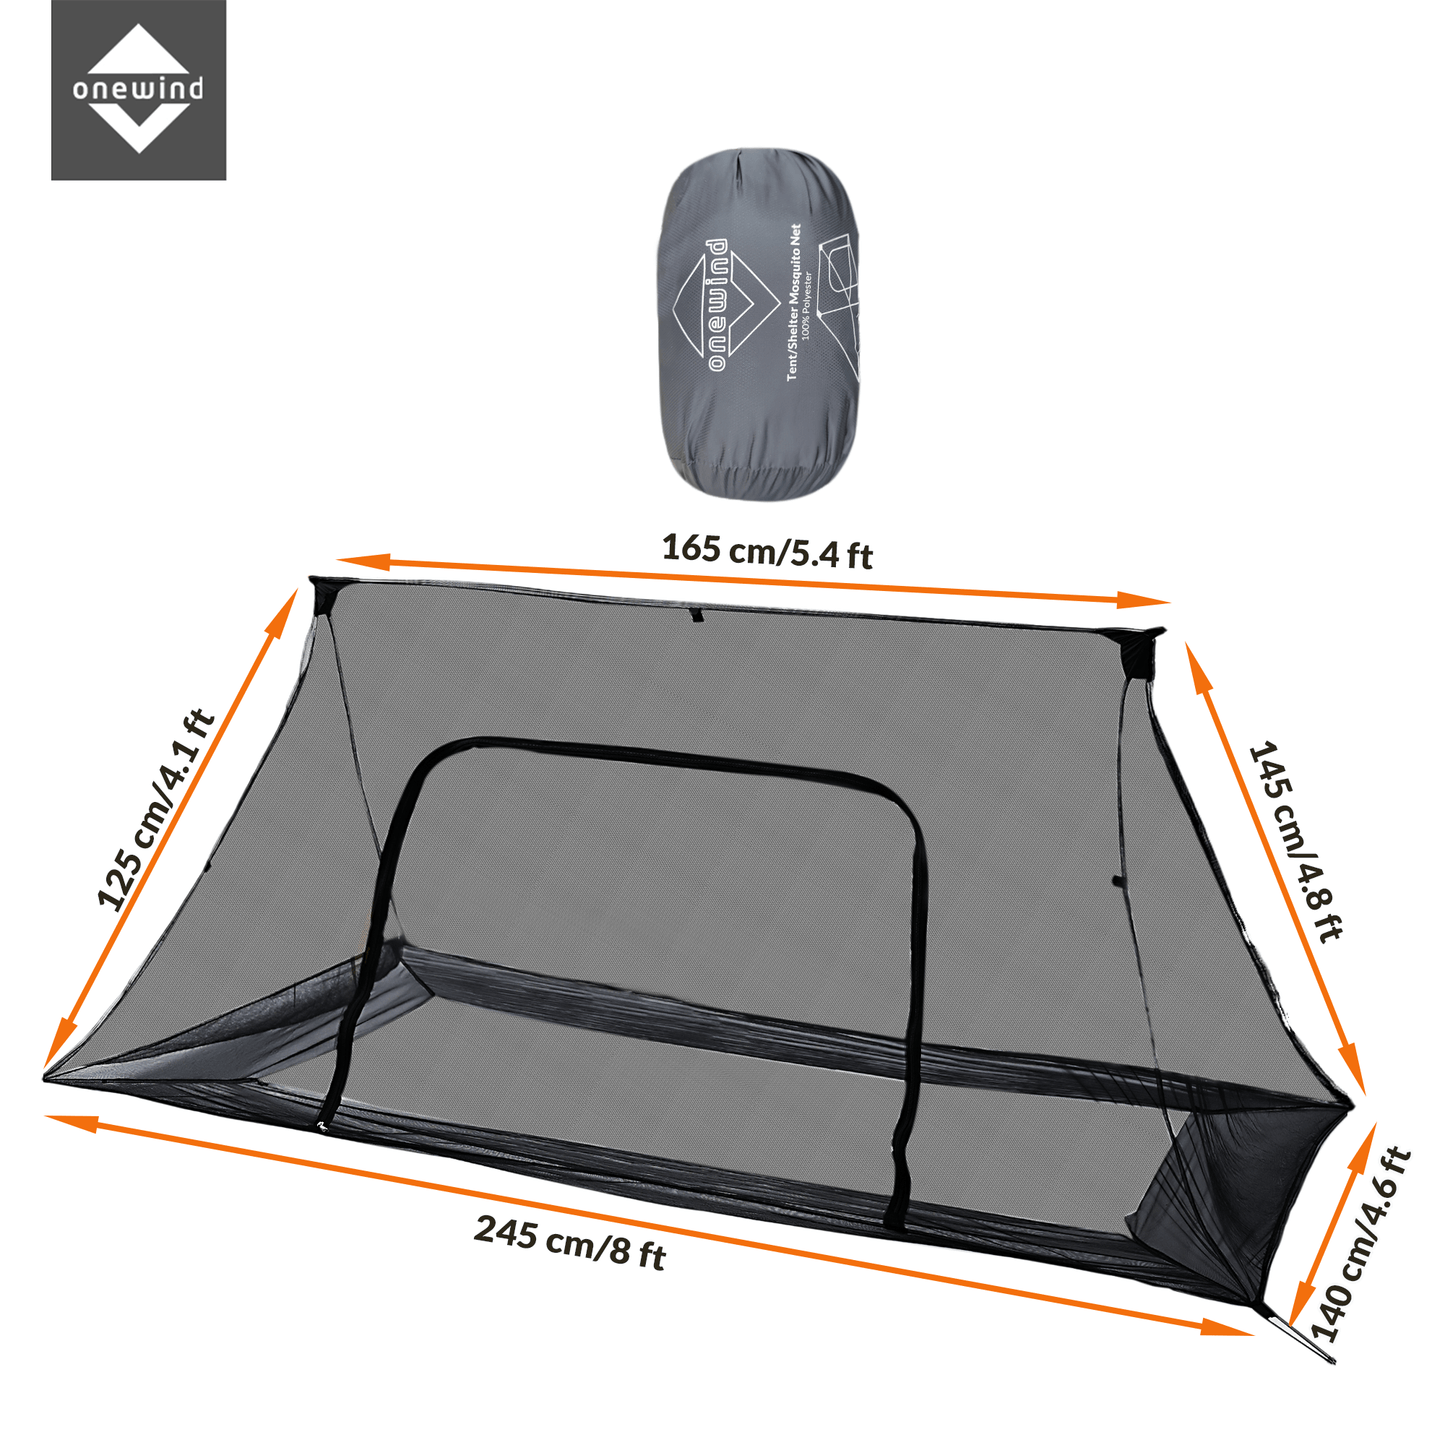 Shelter Bugnet for Camping | Onewind Outdoors